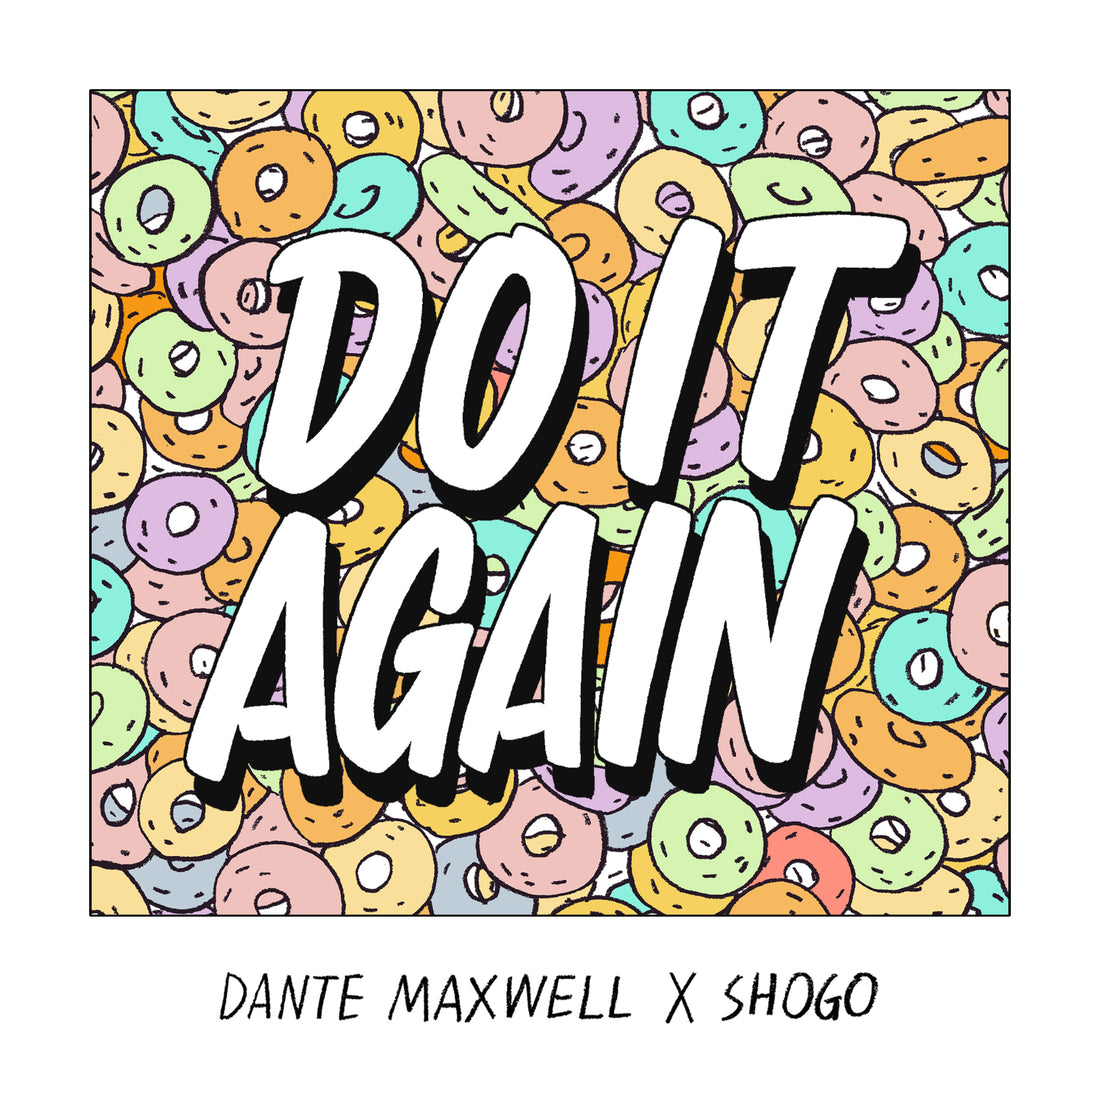 New Single Alert! - "Do It Again" by Shogo and Dante Maxwell